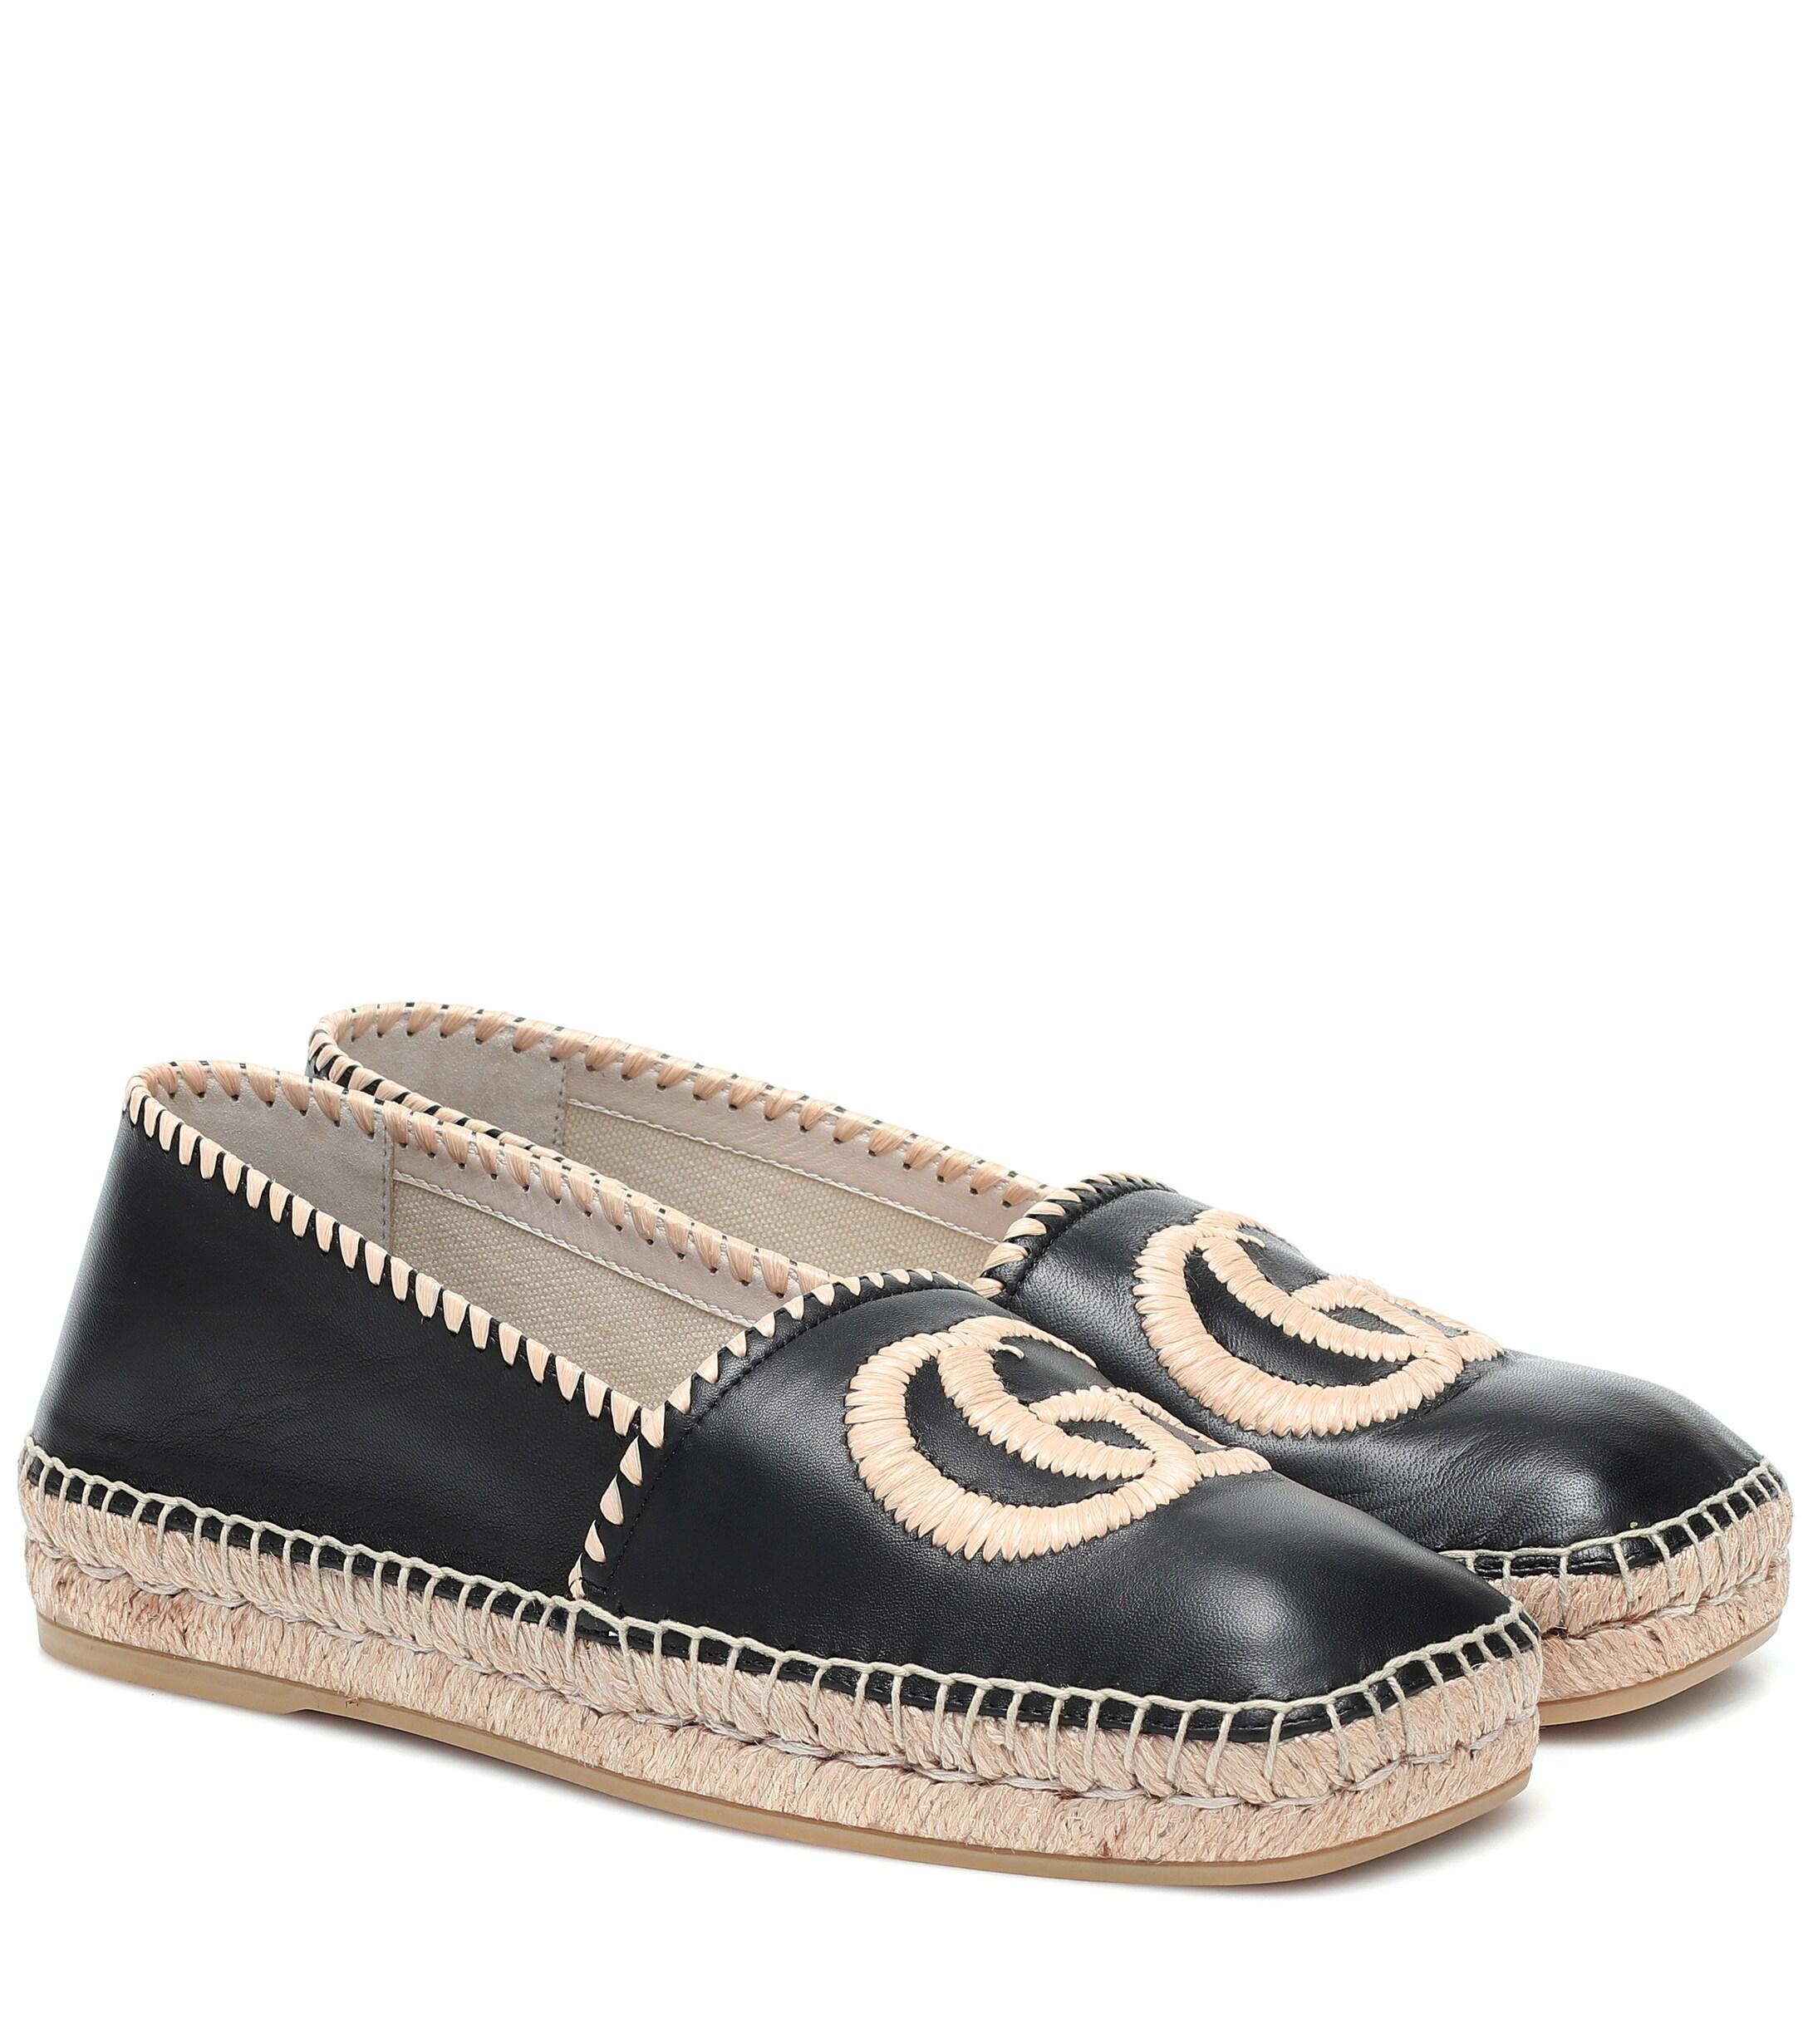 Gucci GG Leather Espadrilles in Black - Lyst